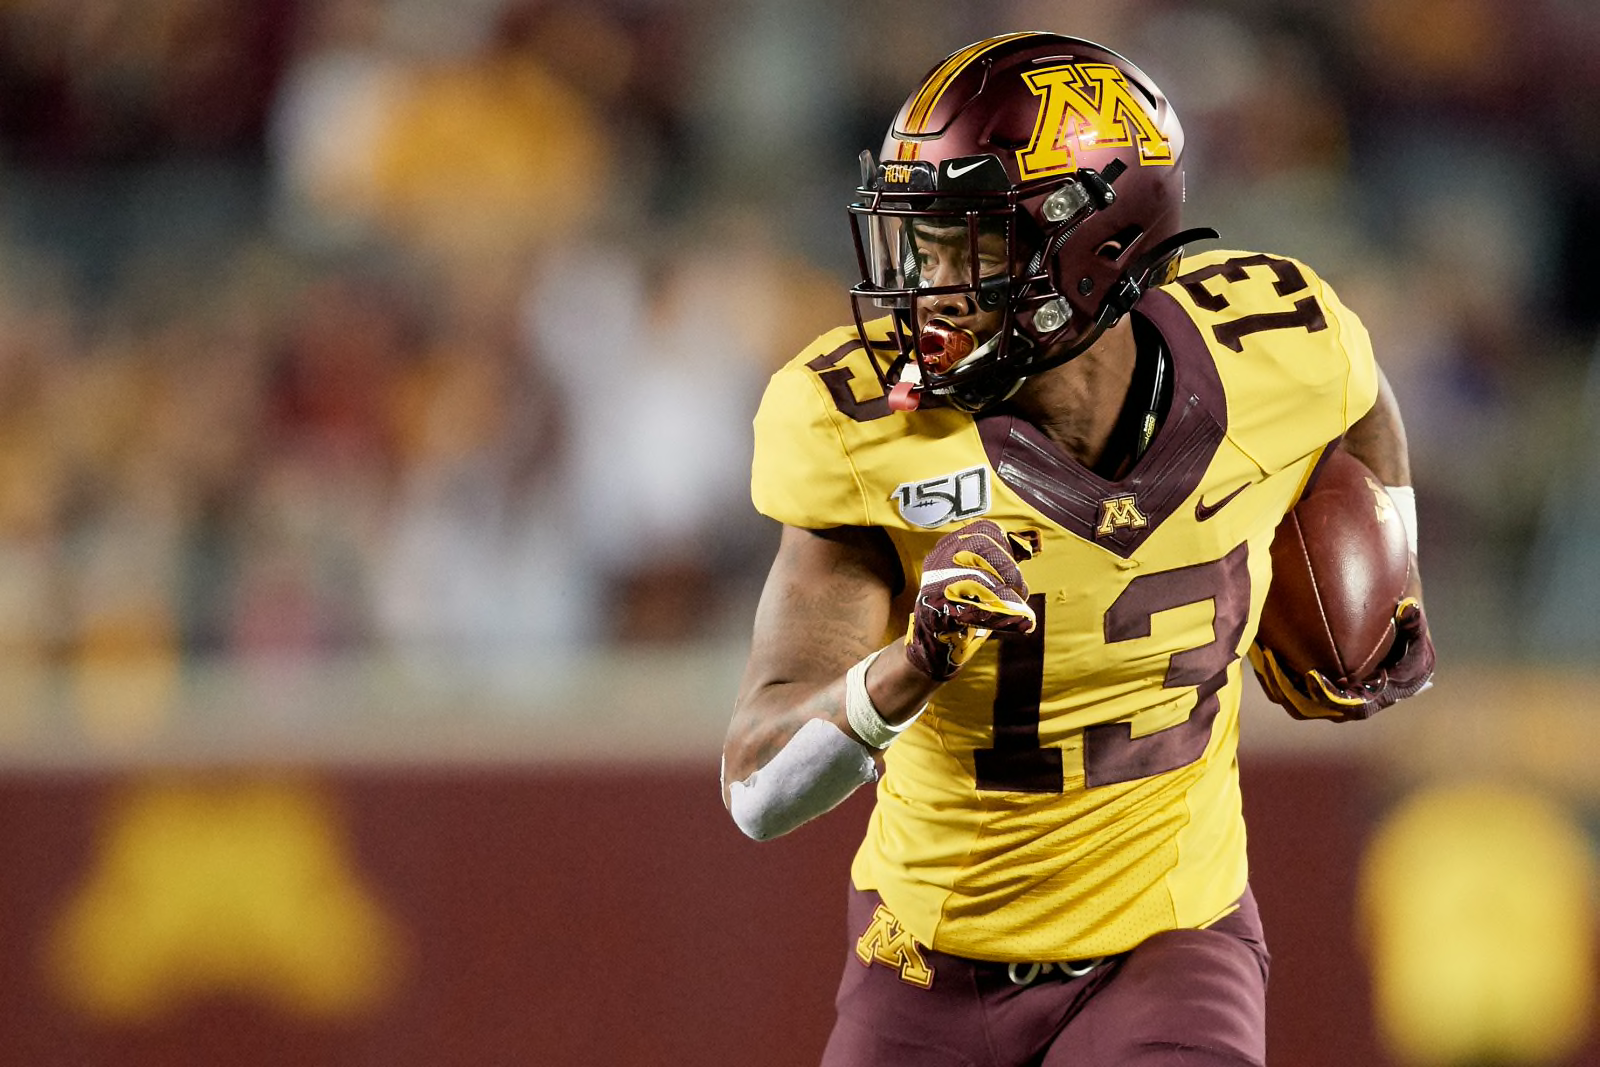 Top 5 wide receiver prospects in the 2021 NFL Draft